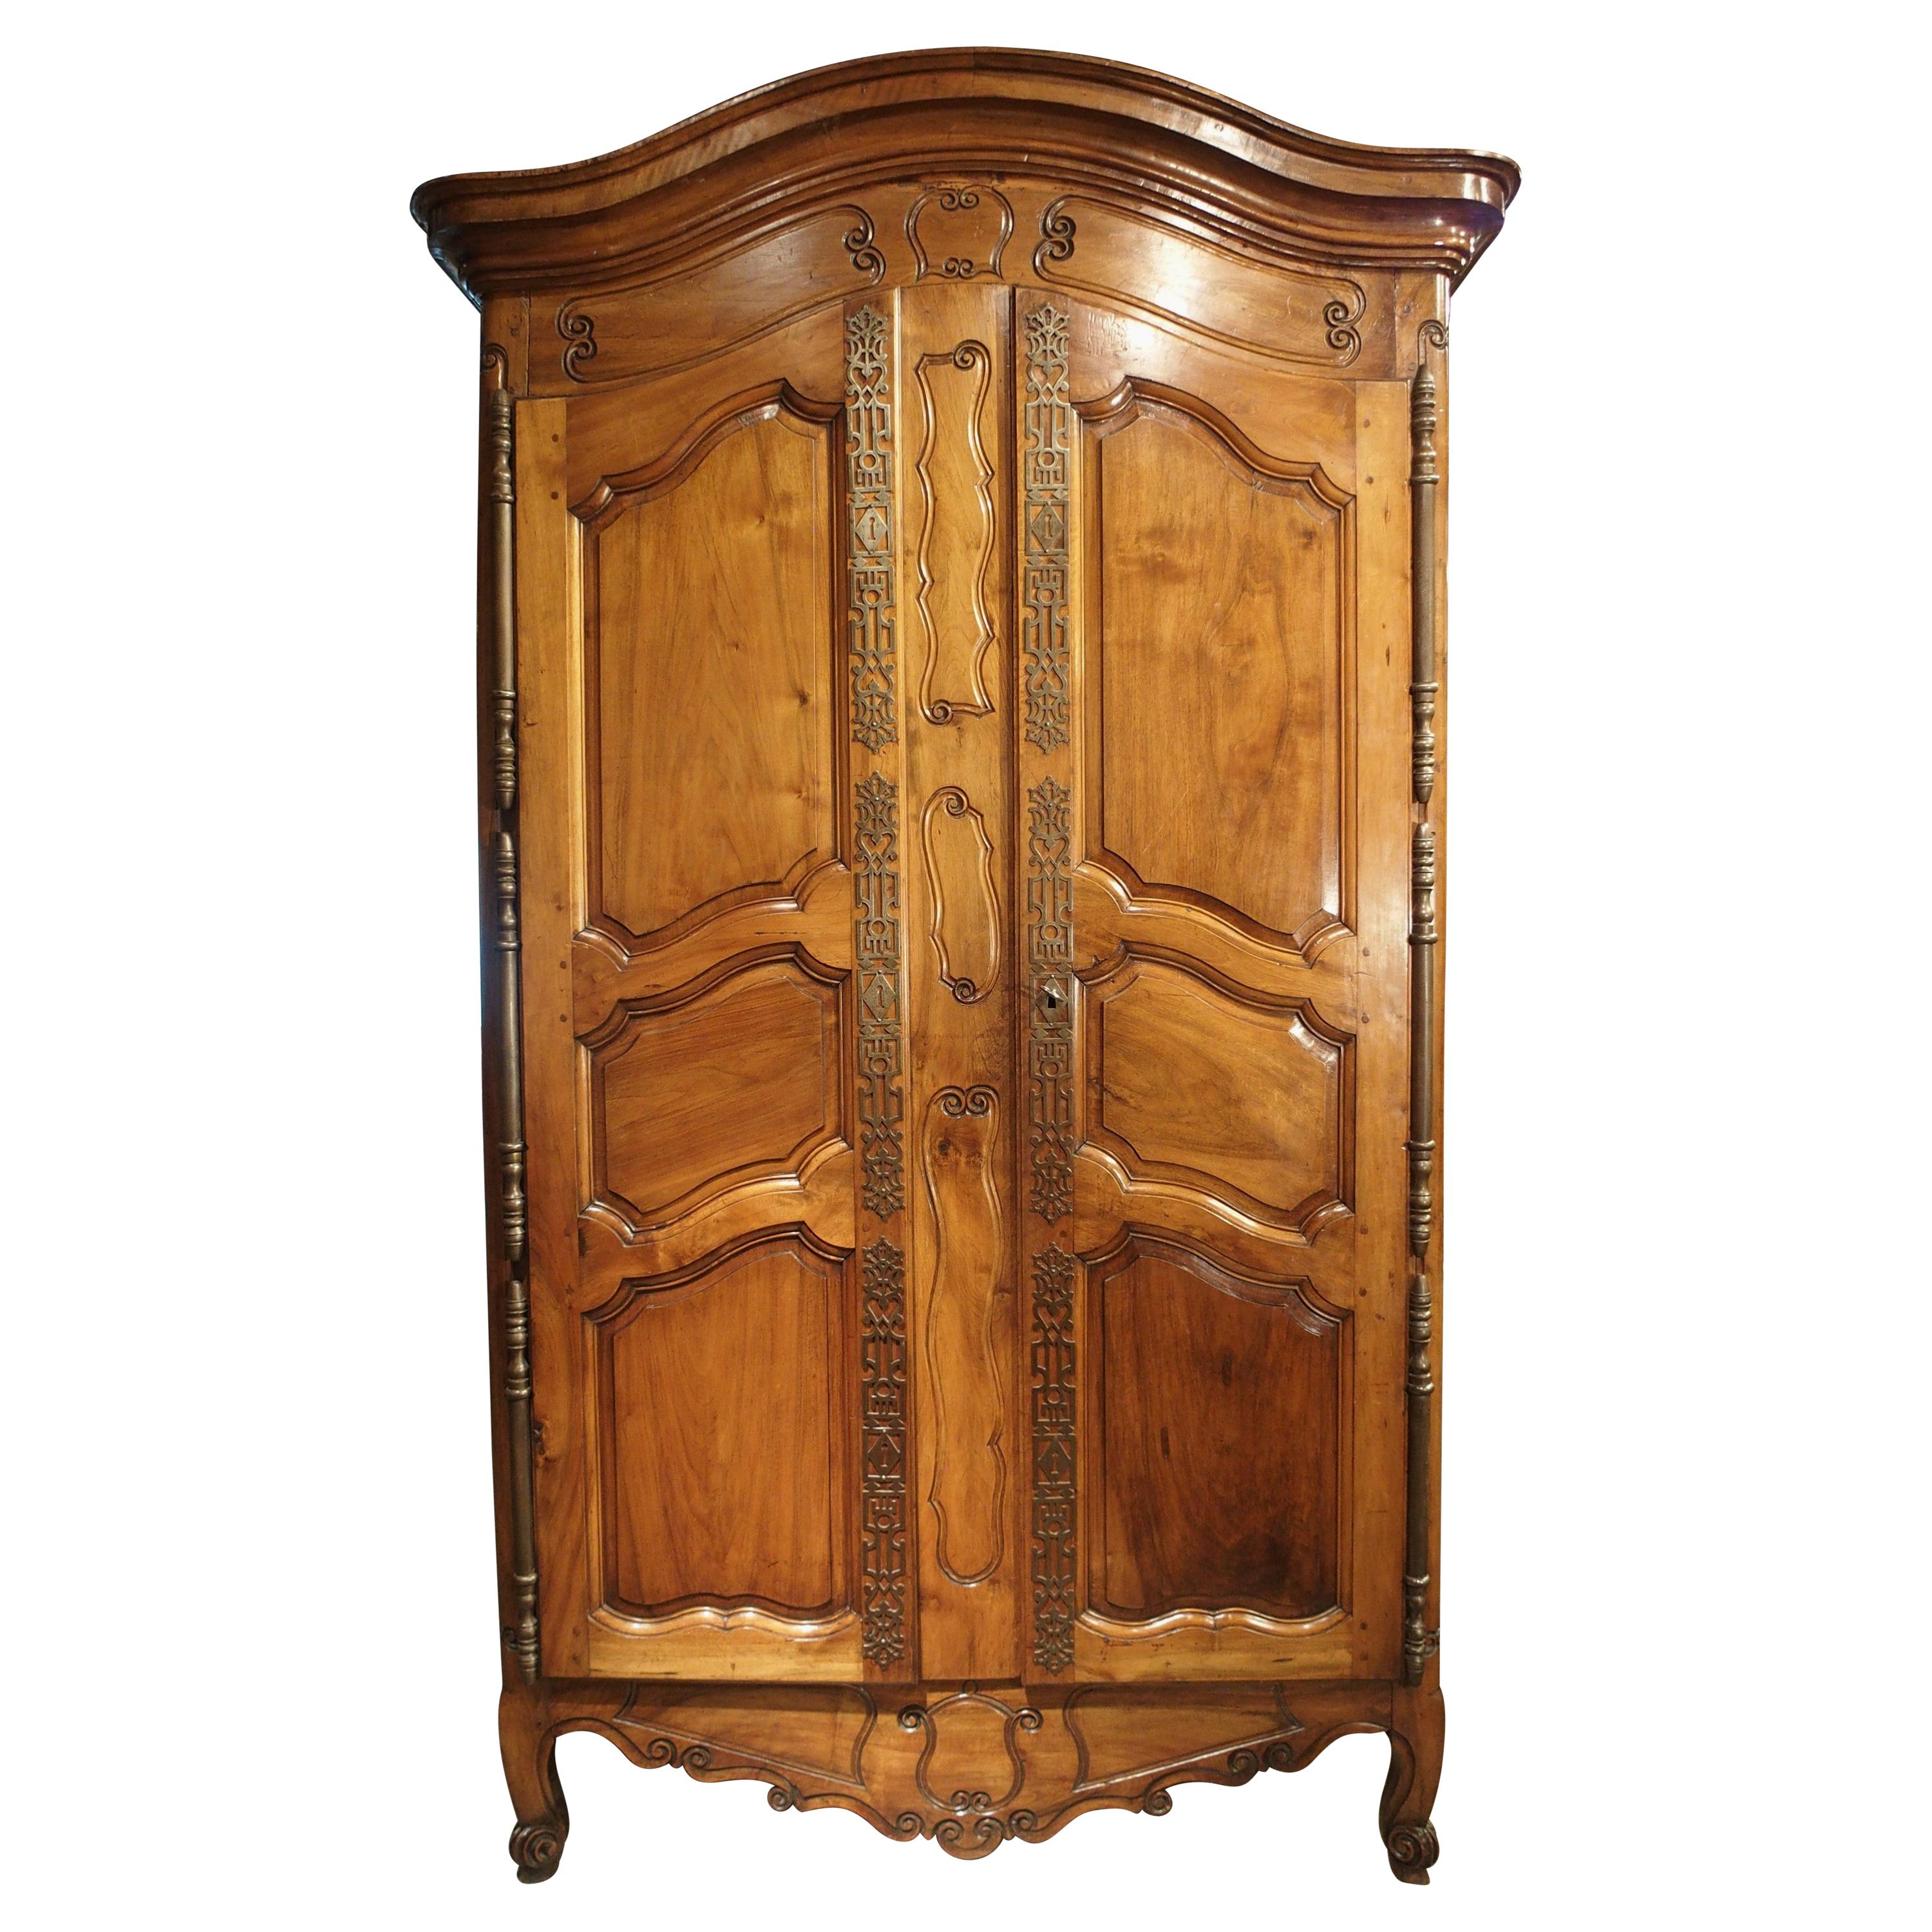 Antique Walnut Wood Armoire from Fourques, France, Circa 1820